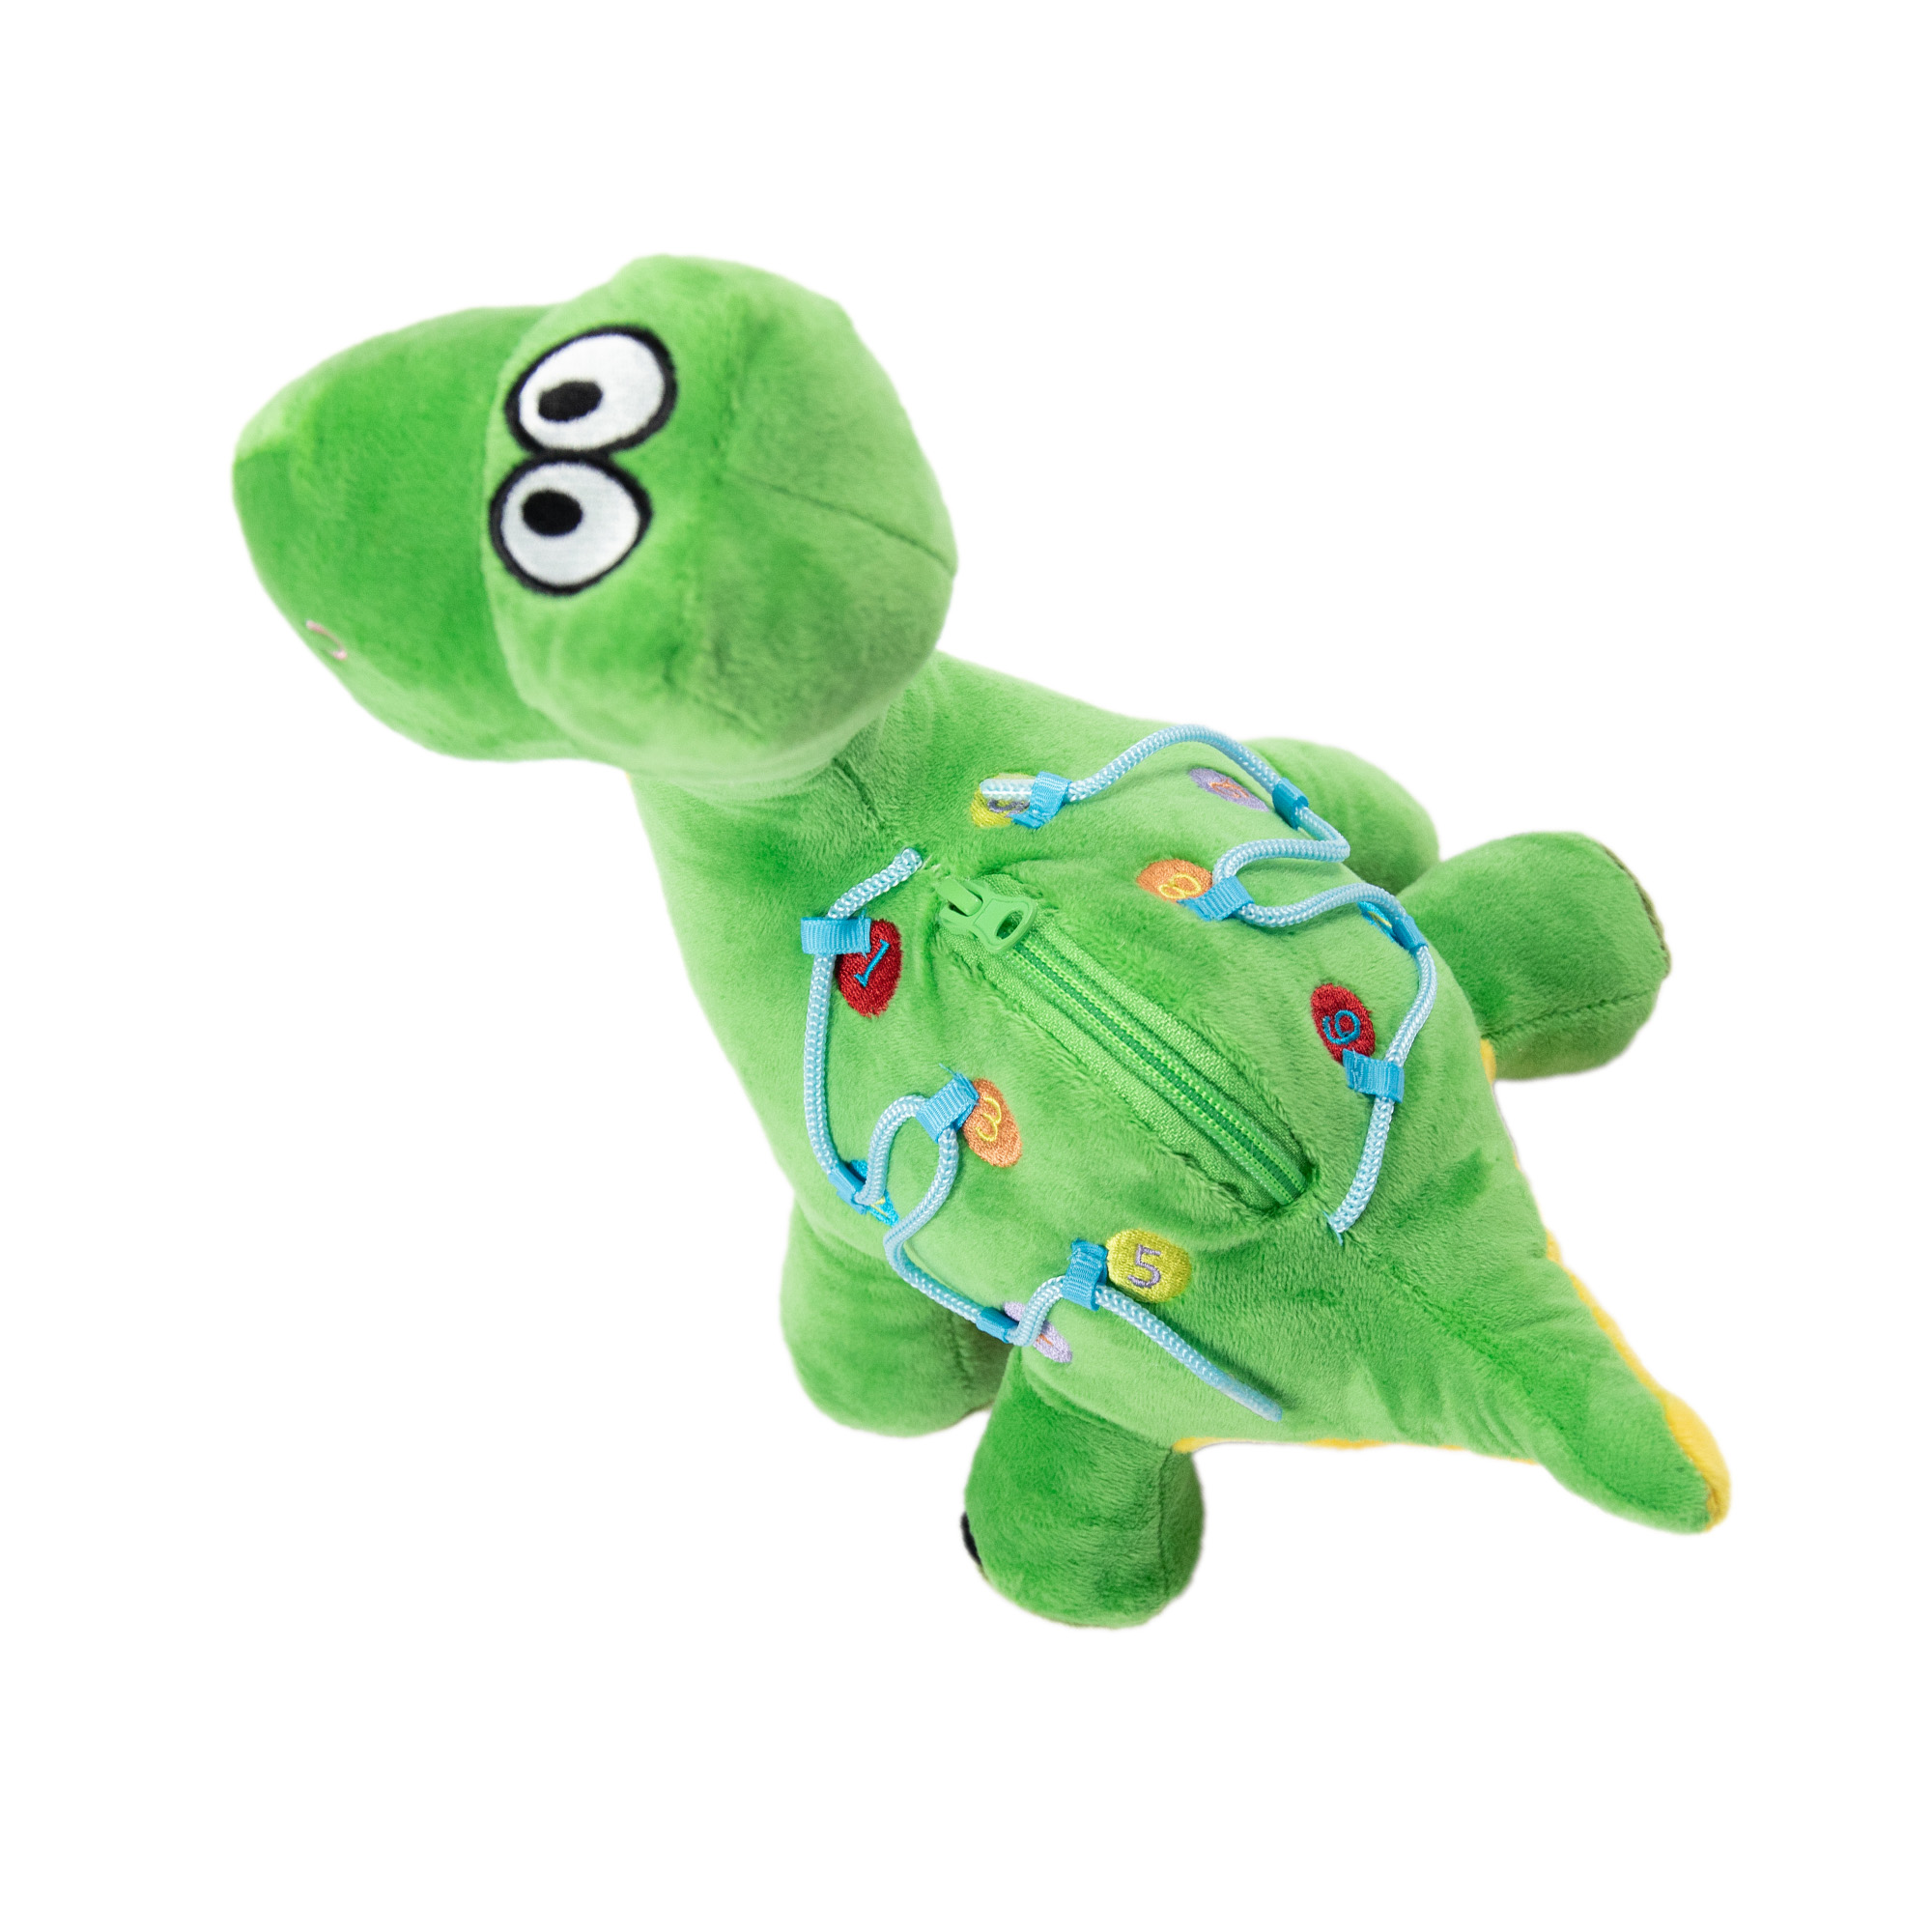 Bouncyband Busy Bee Sensory Activity Toy - Dinosaur image number null